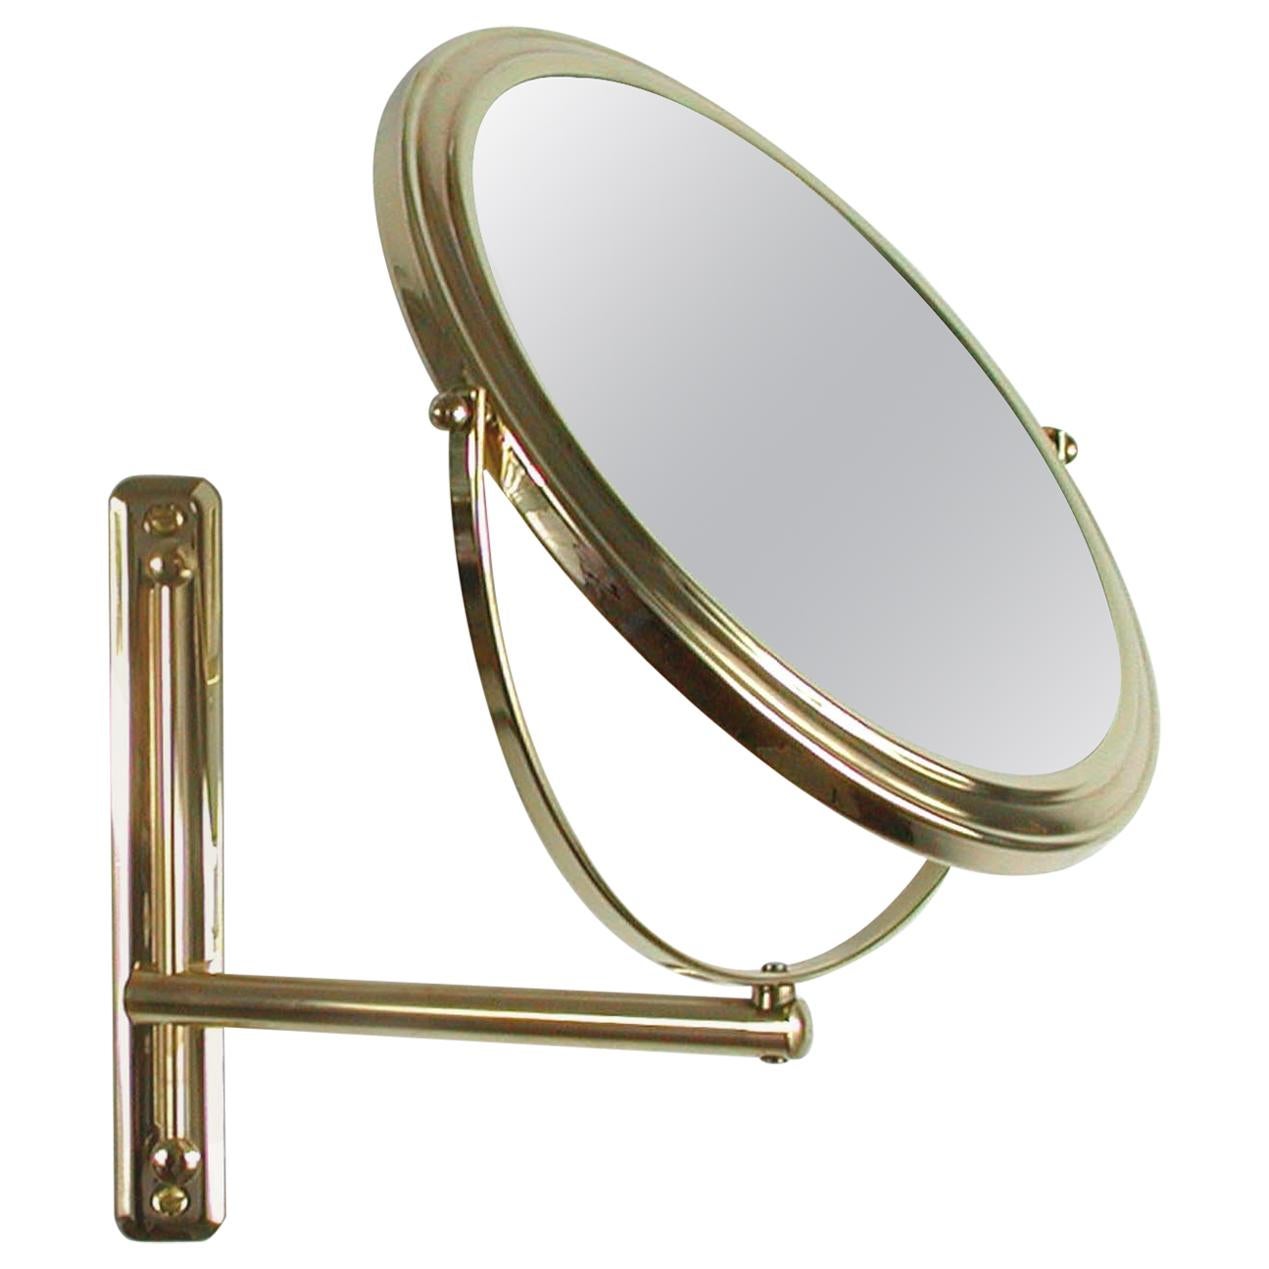 Italian Articulating and Adjustable Brass Vanity 2-Sided Wall Mirror, 1950s For Sale